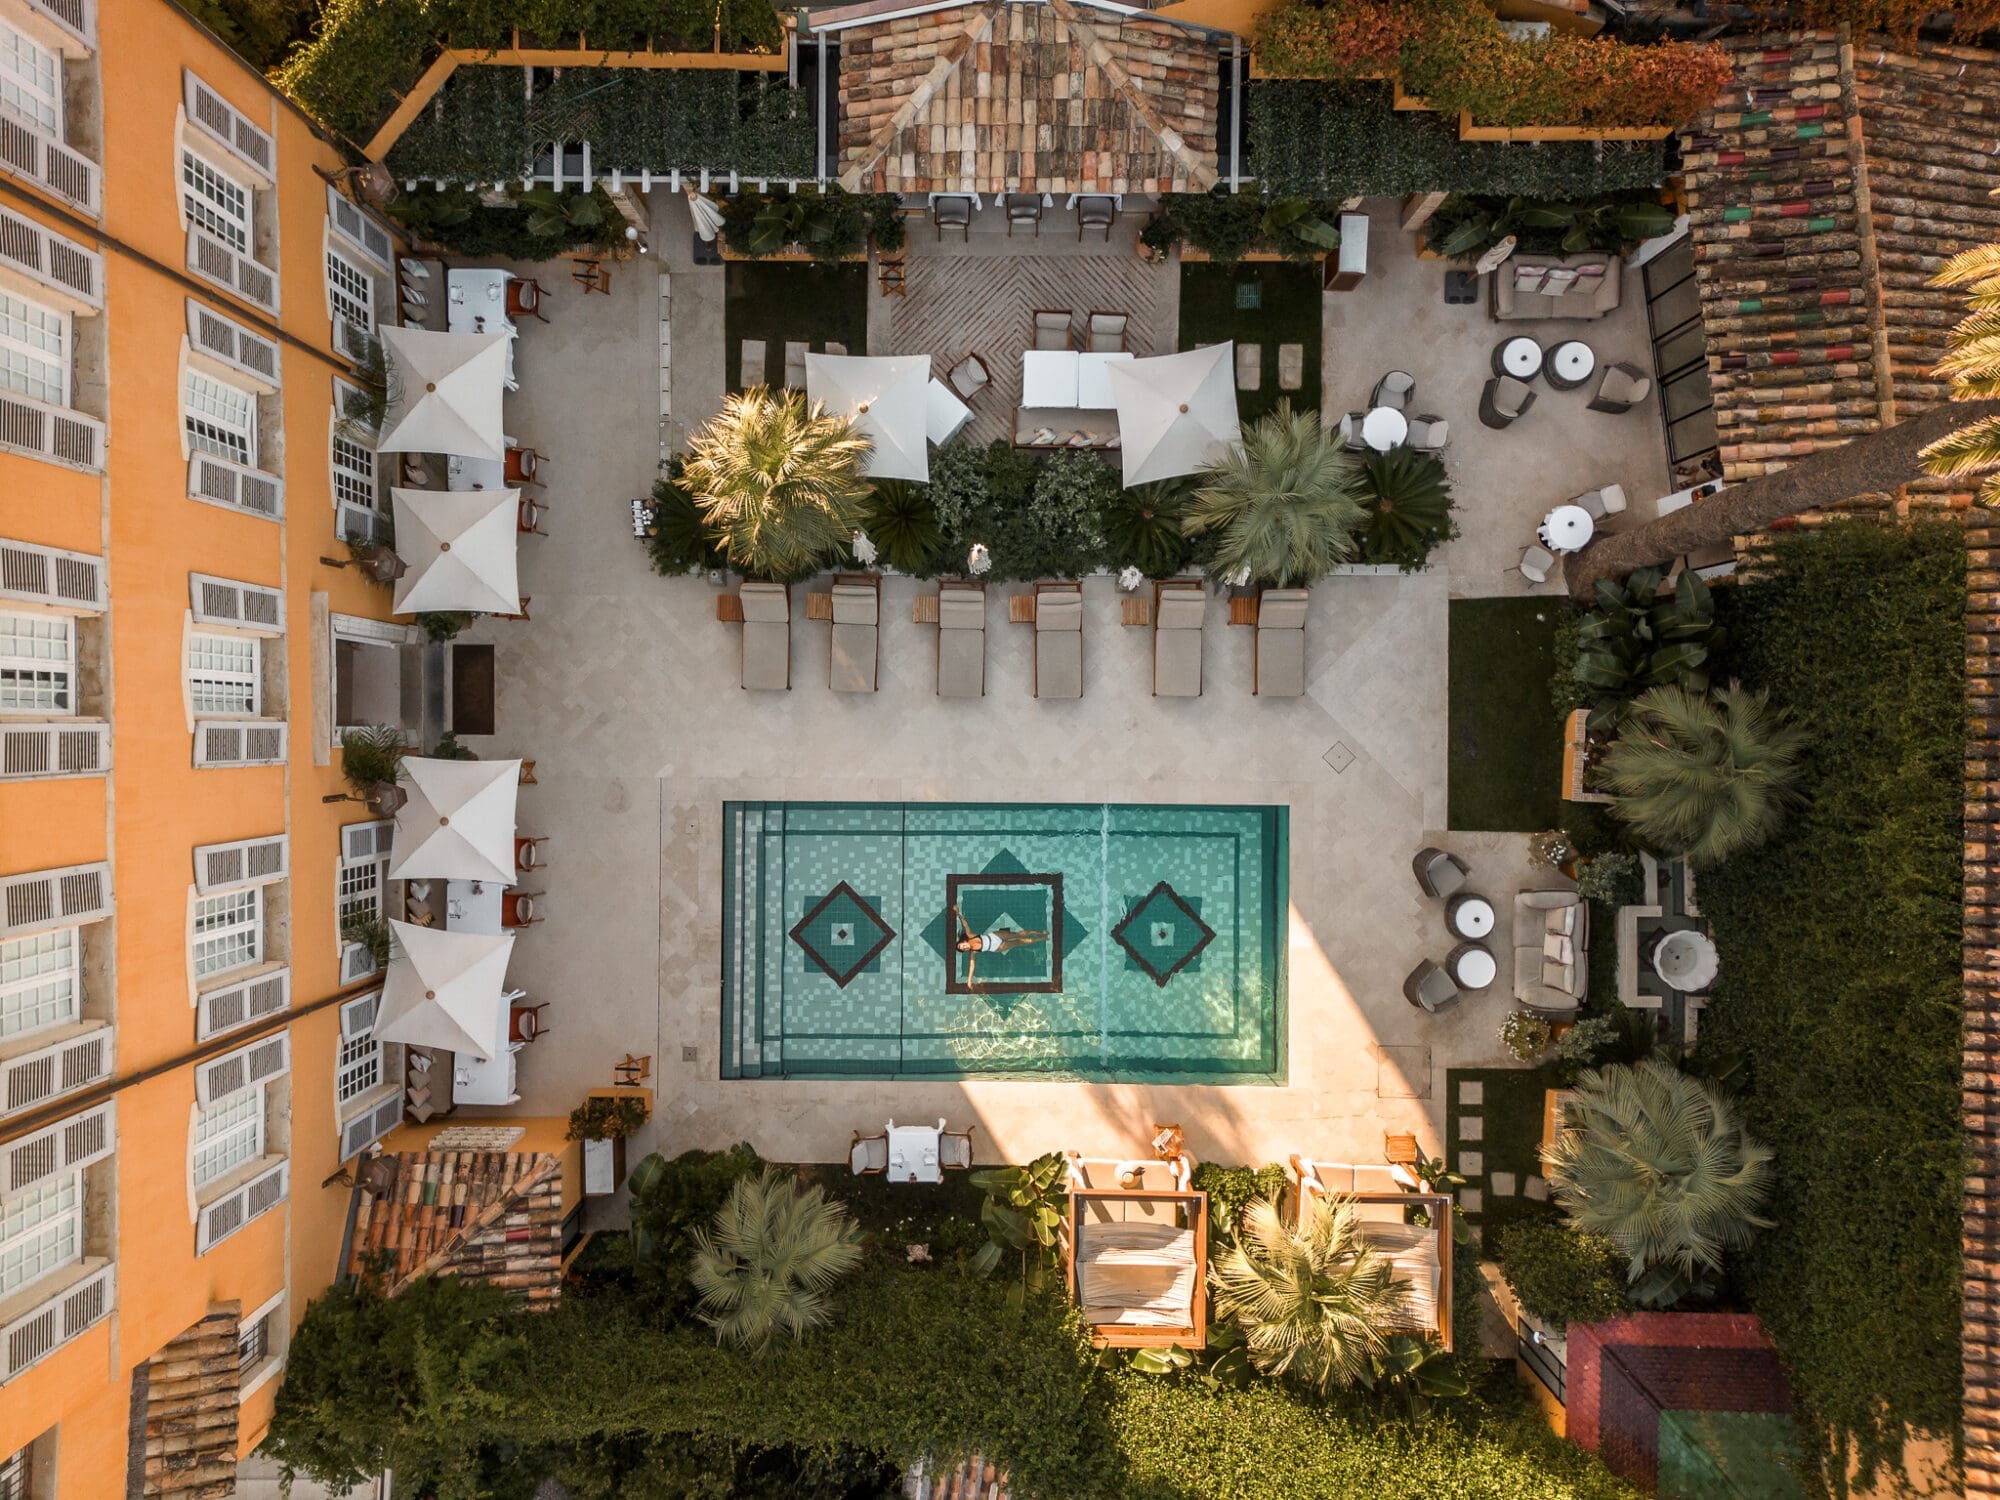 An aerial drone shot of the courtyard at Airelles Pan Deï Palace in Saint Tropez, with Anoushka floating in the rectangular square pool.